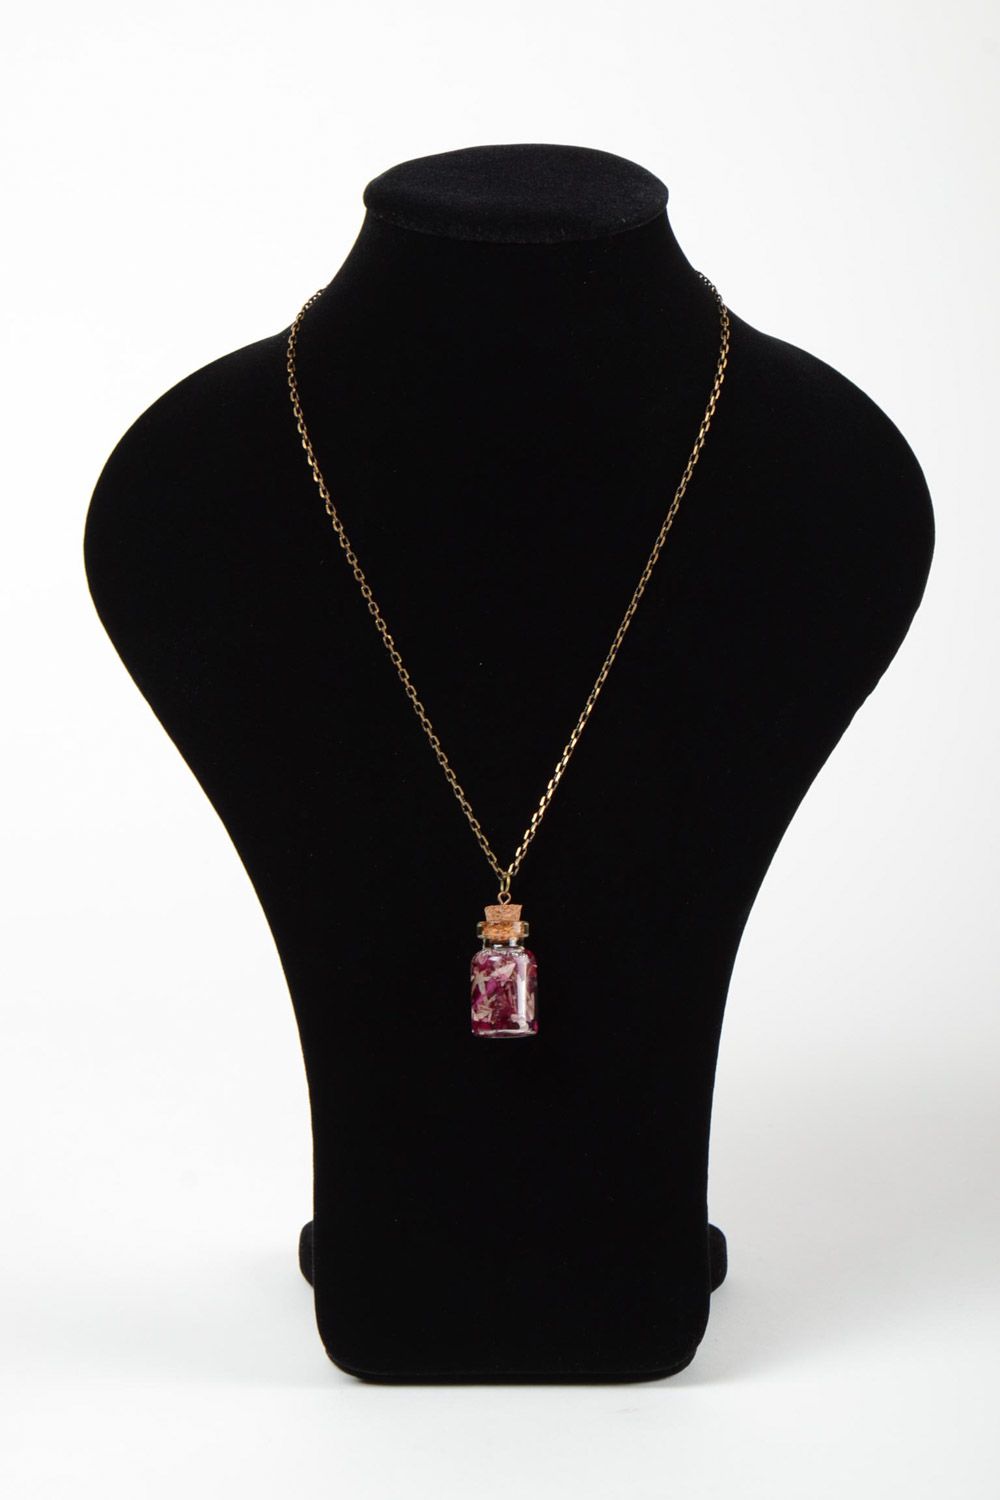 Handmade epoxy resin neck pendant with real flowers inside in the shape of transparent vial photo 2